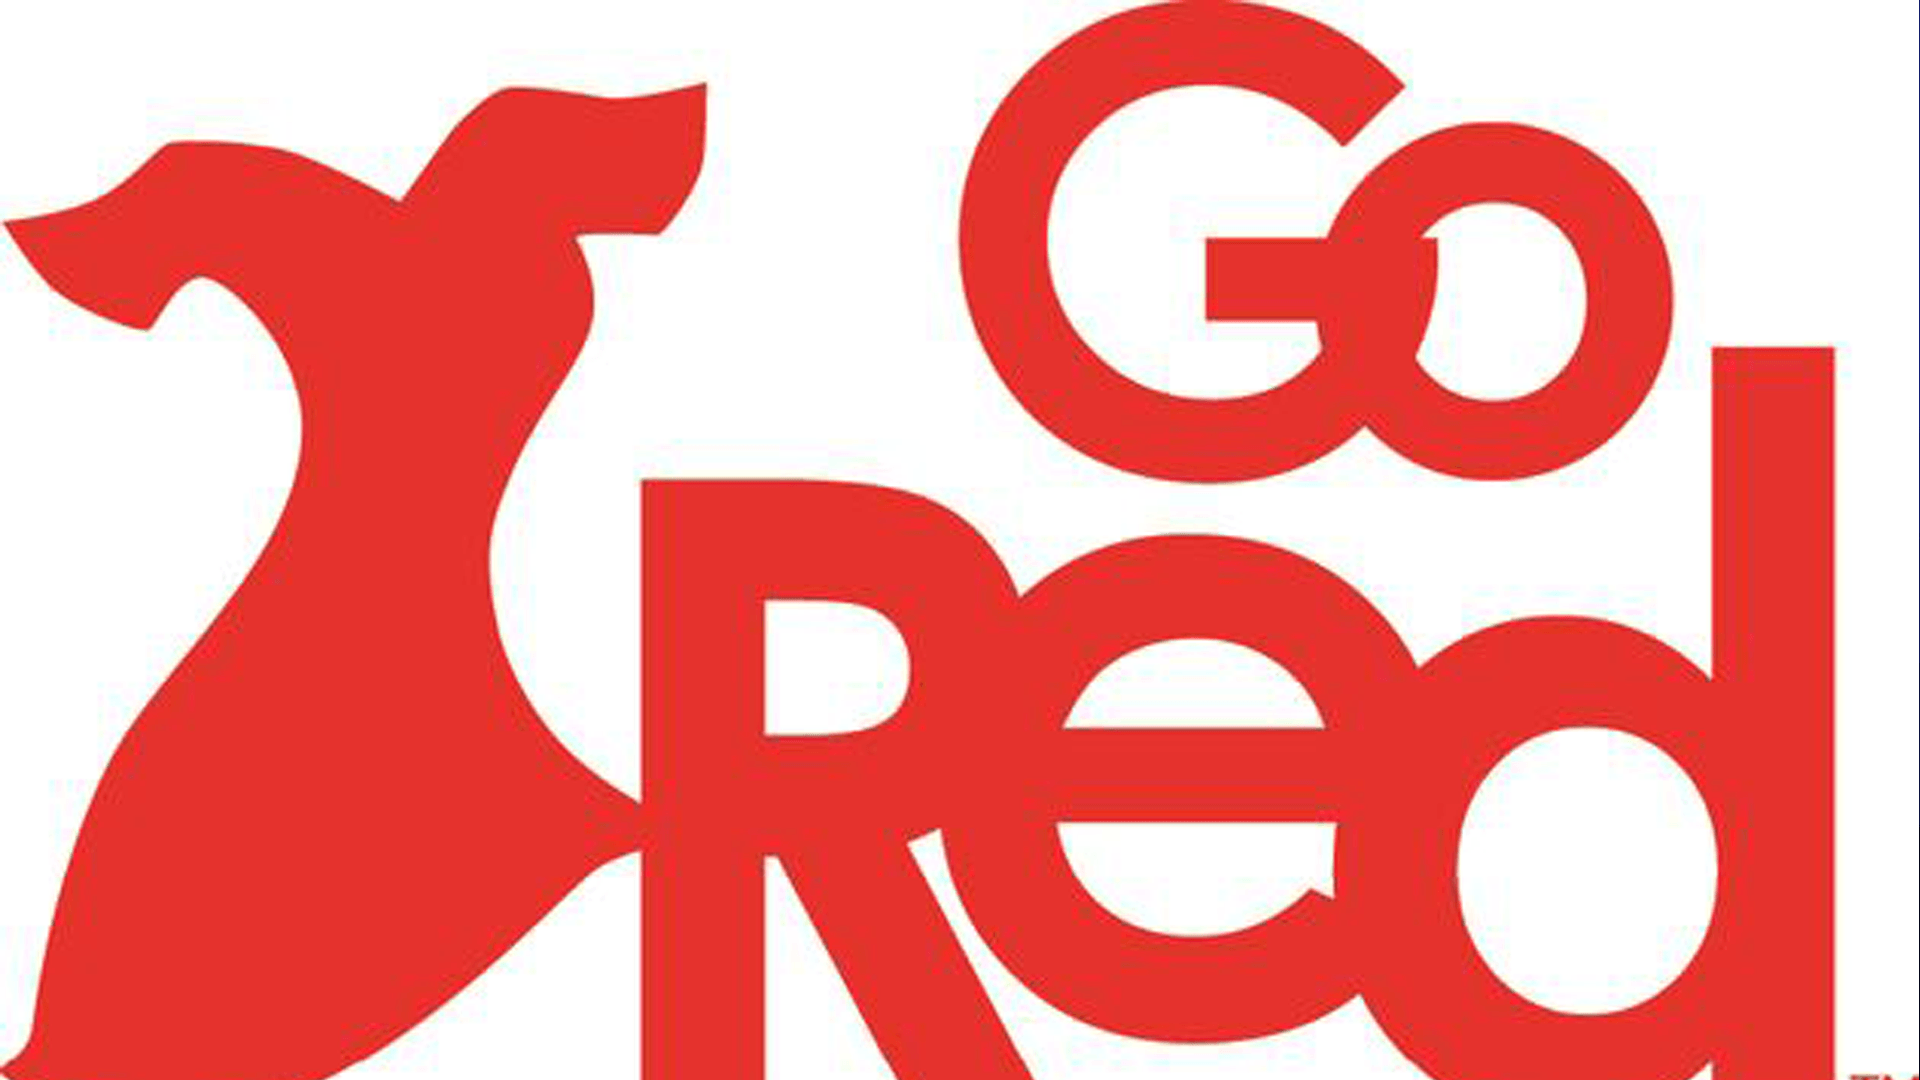 Red Day Logo - Go Red For Women' kicks off at the national wear red day in the US